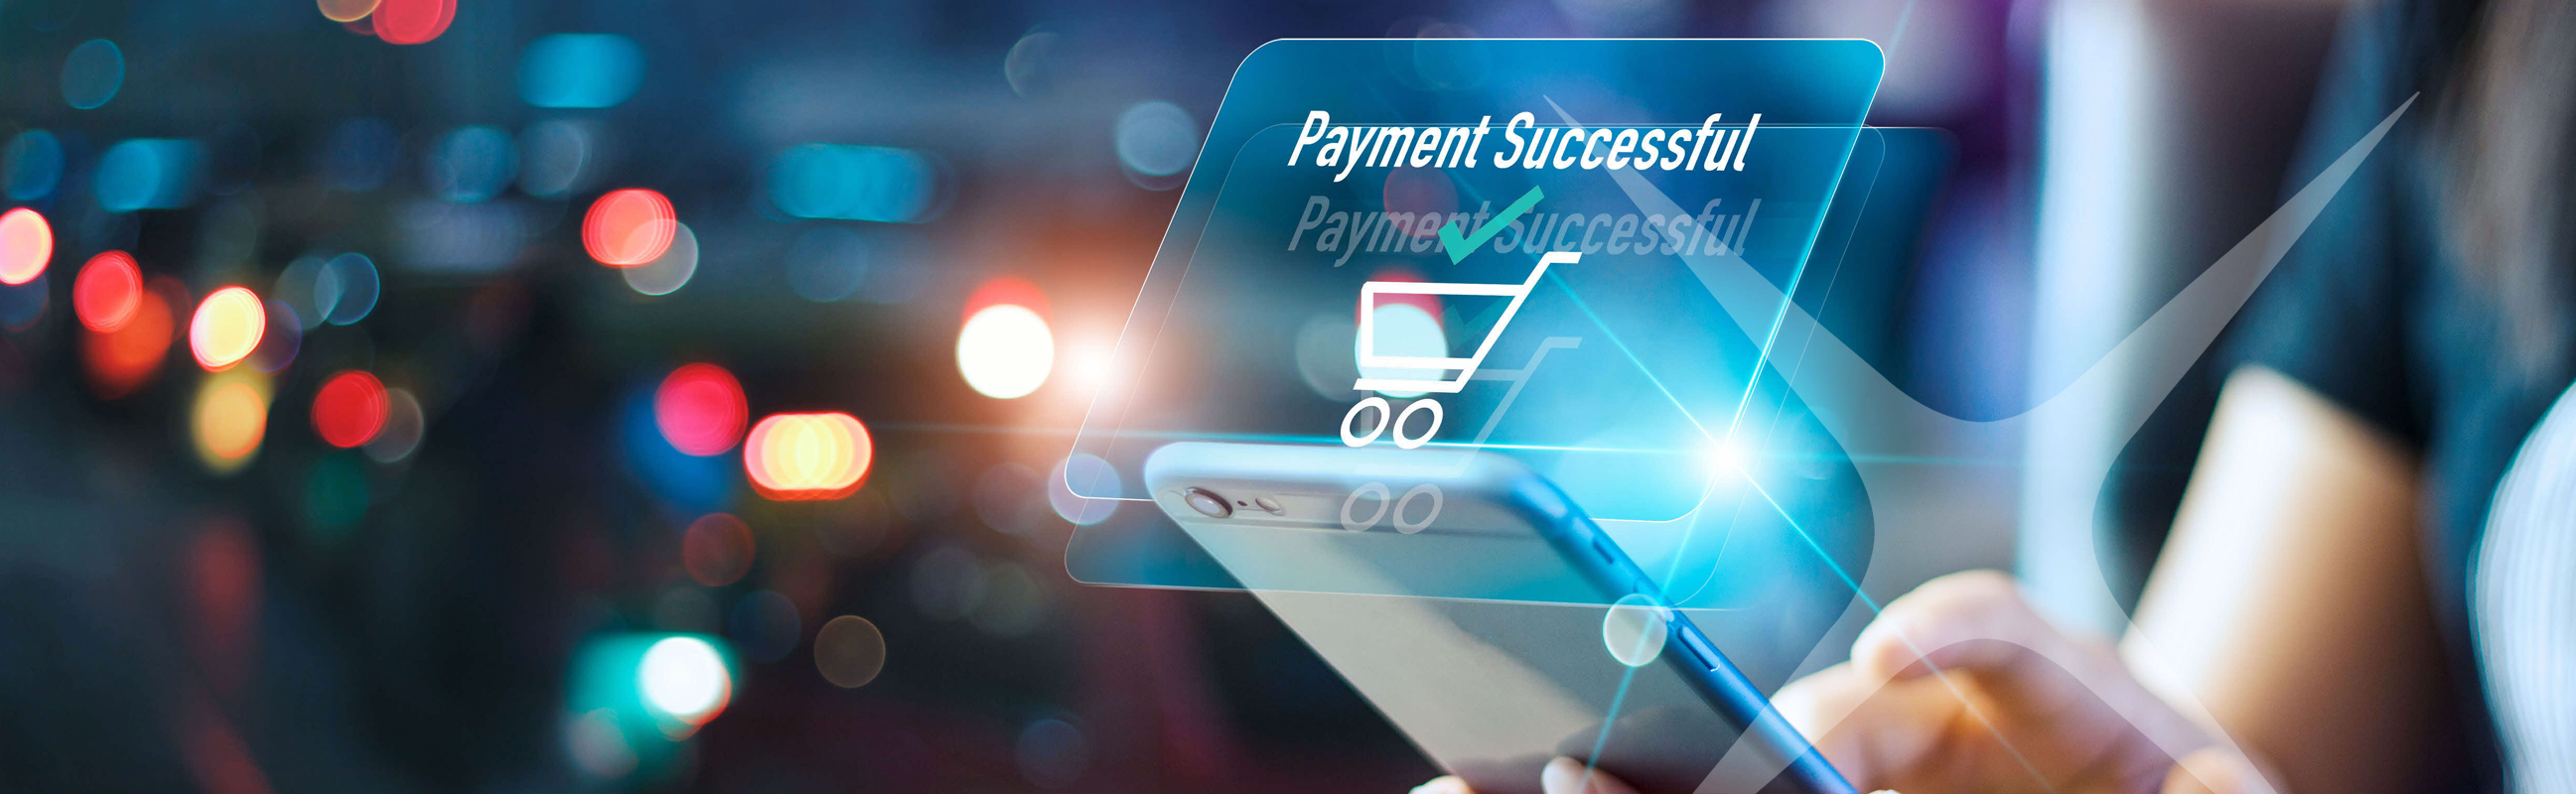 a-new-era-in-payment-innovations